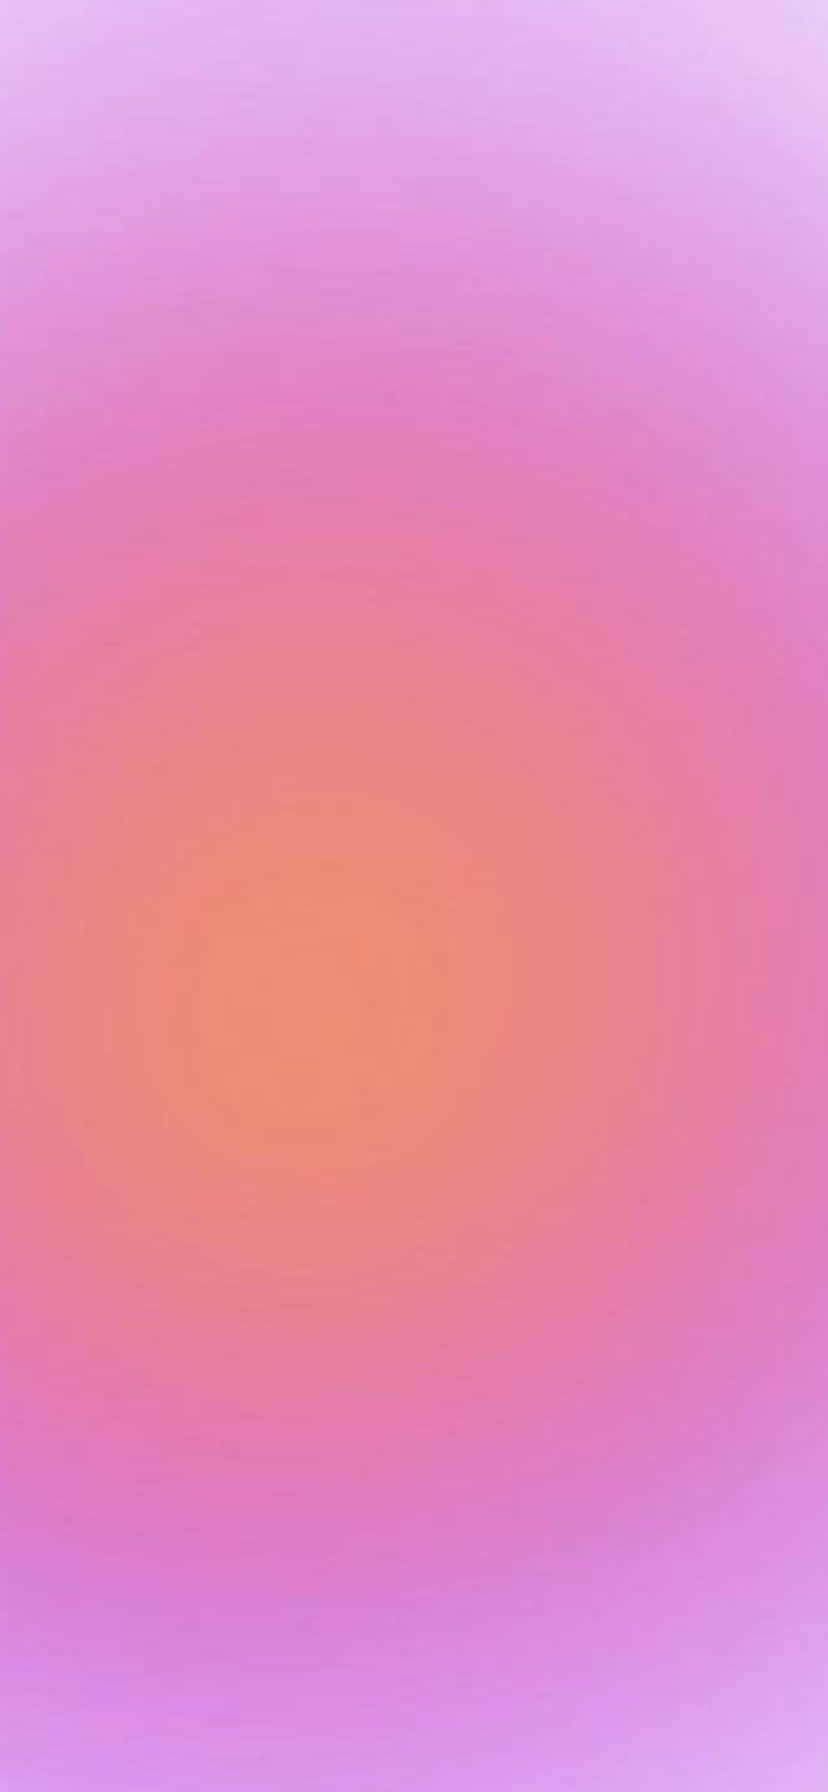 A Pink And Purple Abstract Background Wallpaper